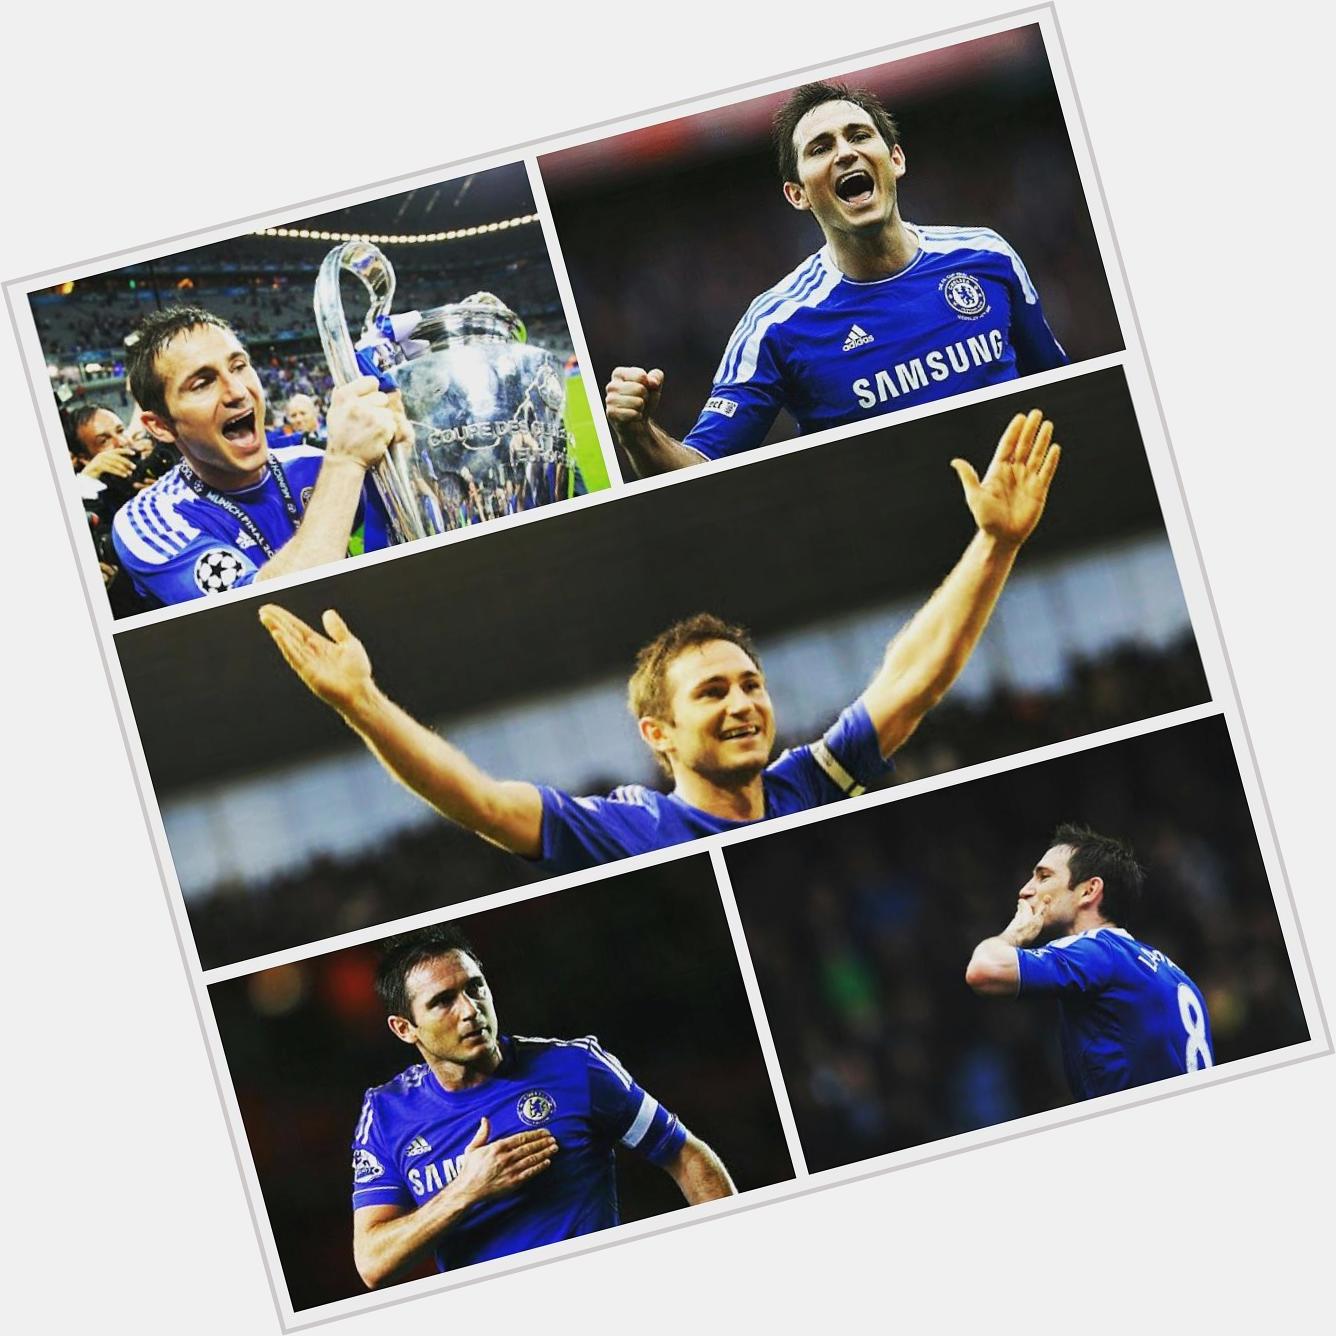 Happy birthday to Chelsea Legend Frank Lampard.The Midfielder turns 36 today.   